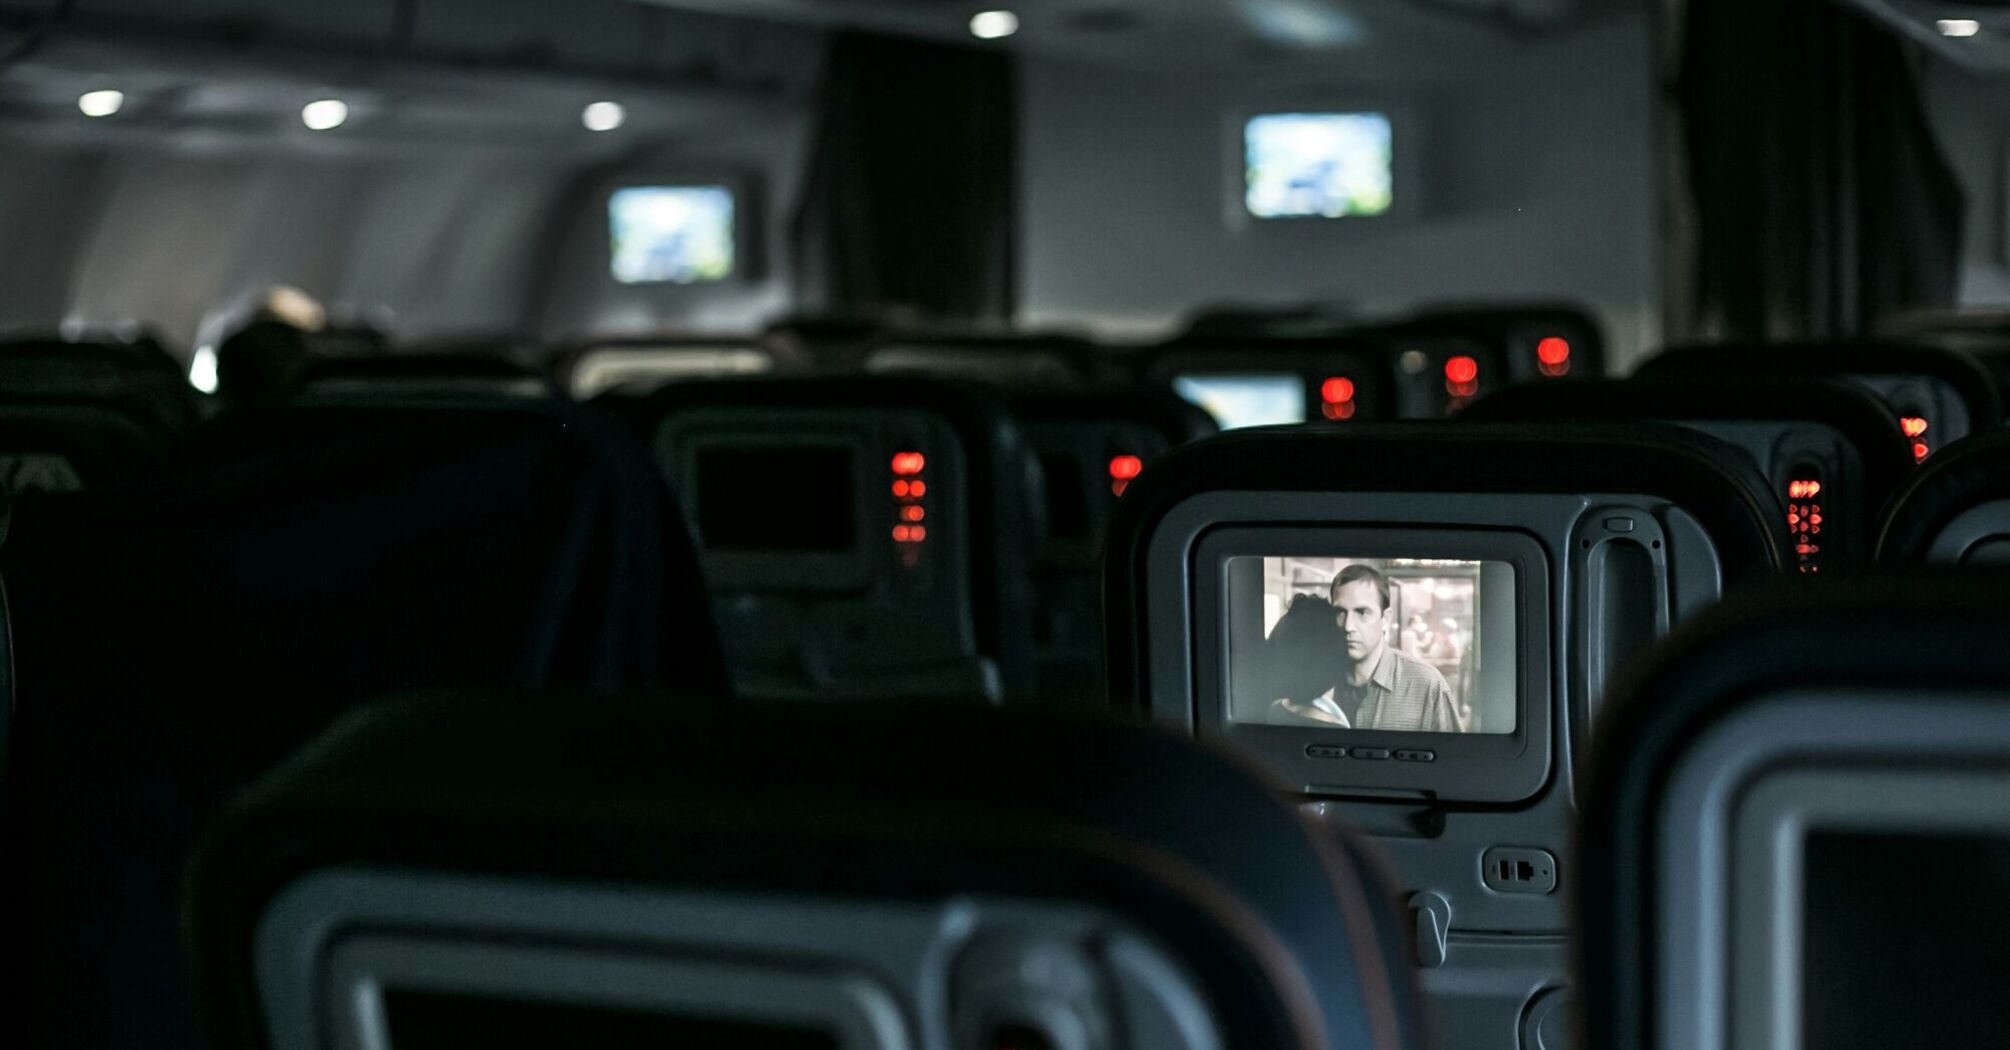 In-flight entertainment screens showing a movie on an airplane